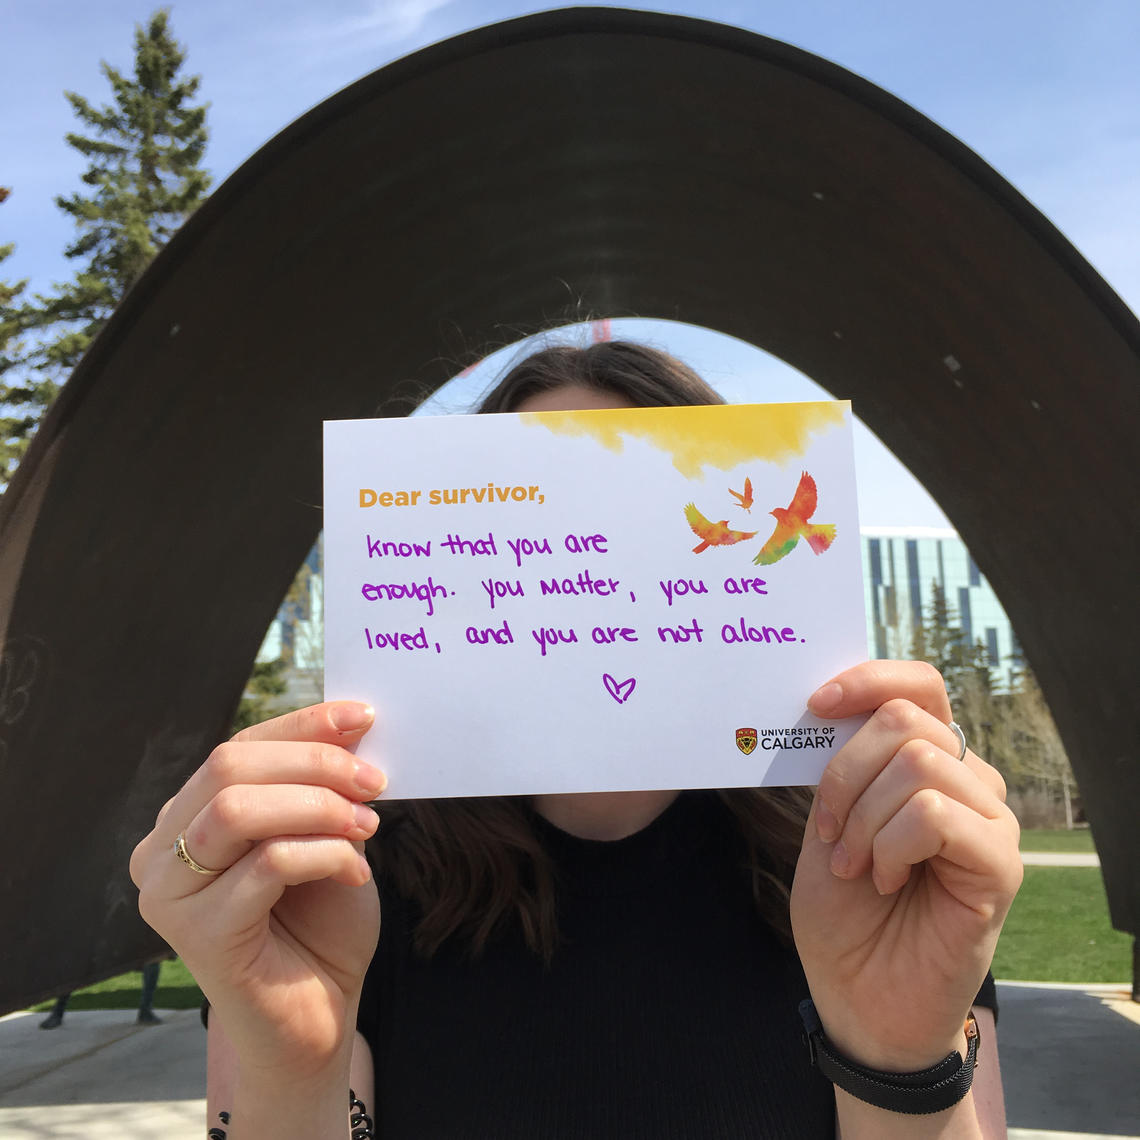 Share your #SurvivorLoveLetters during Sexual Violence Awareness Month